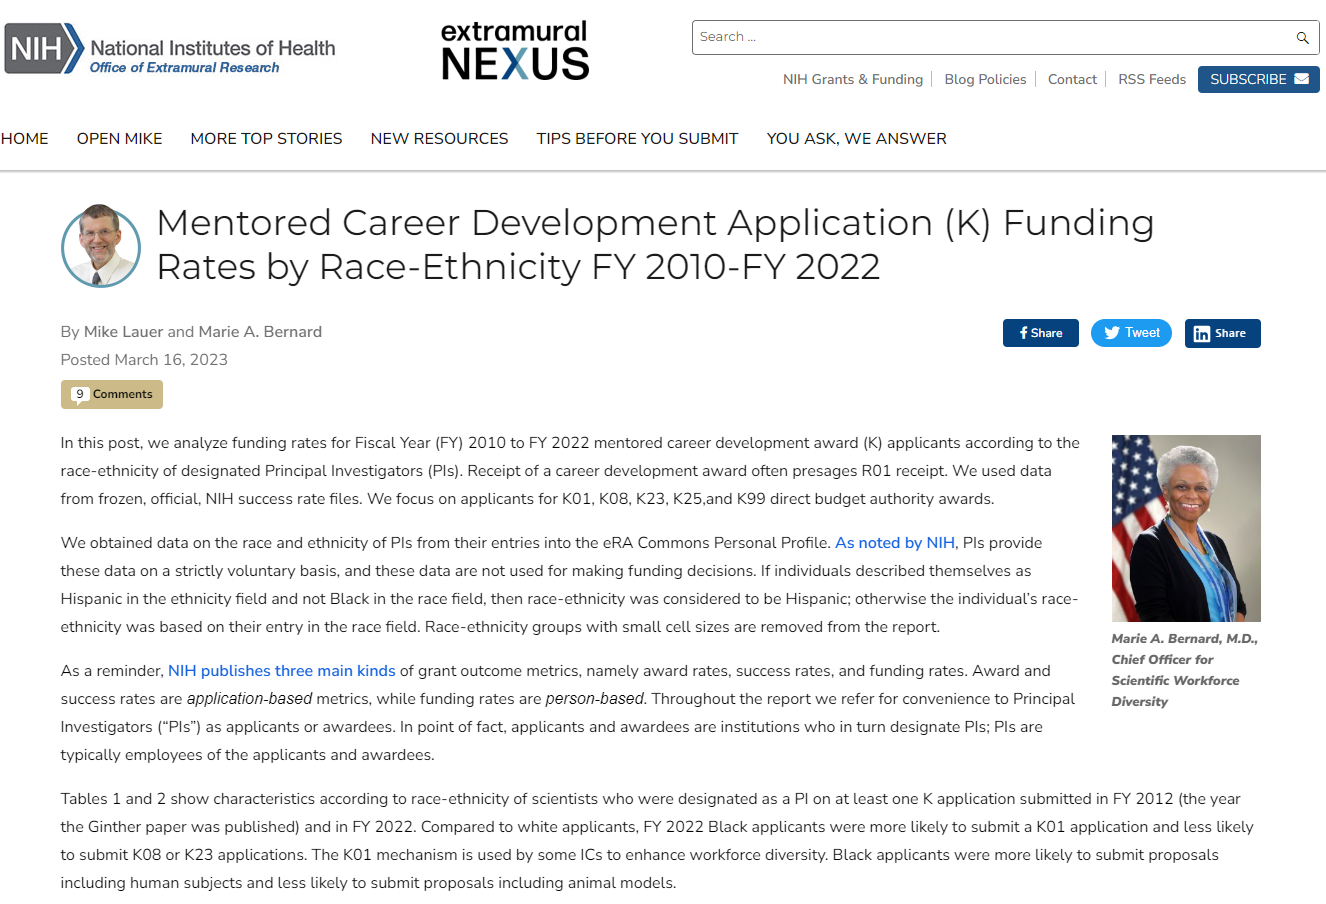 Beginning of blog post "Mentored Career Development Application (K) Funding Rates by Race-Ethnicity FY 2010-FY 2022"